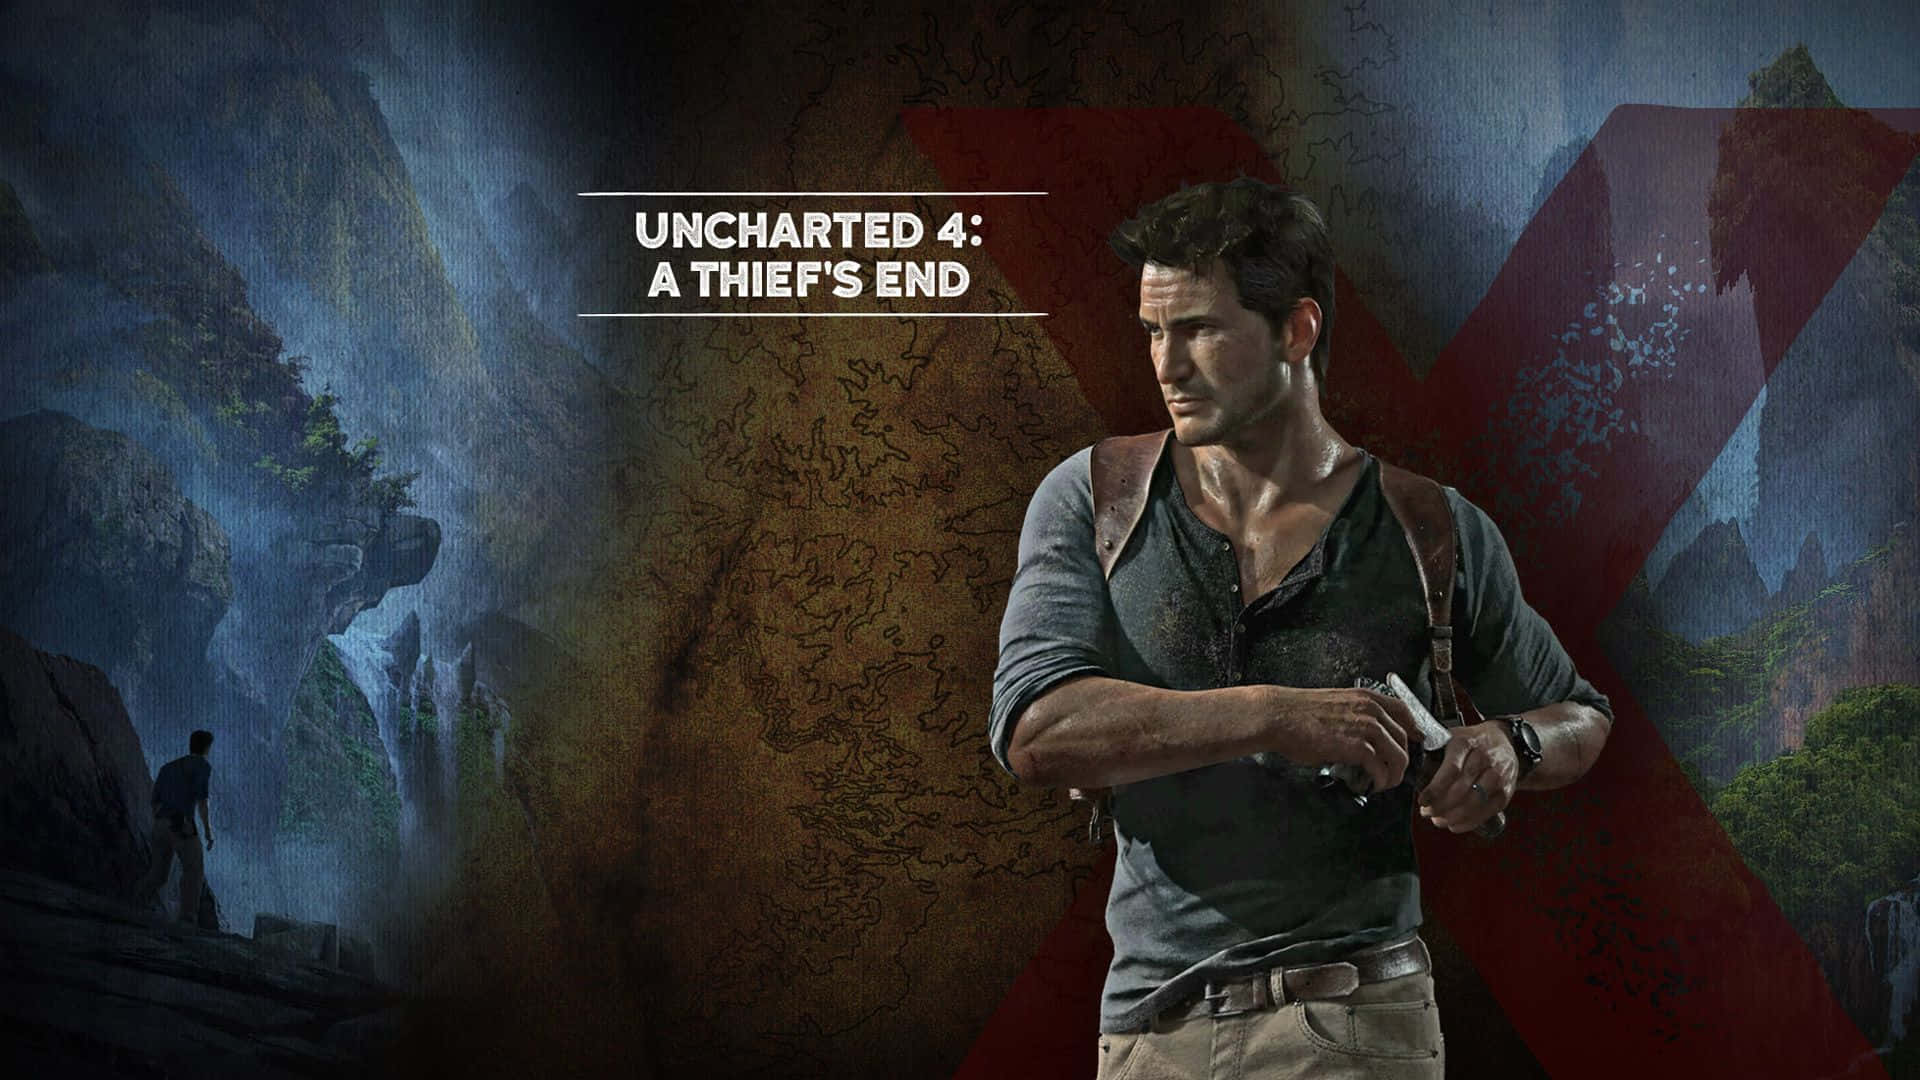 Uncharted C A Thief's End - Xbox 360 Wallpaper